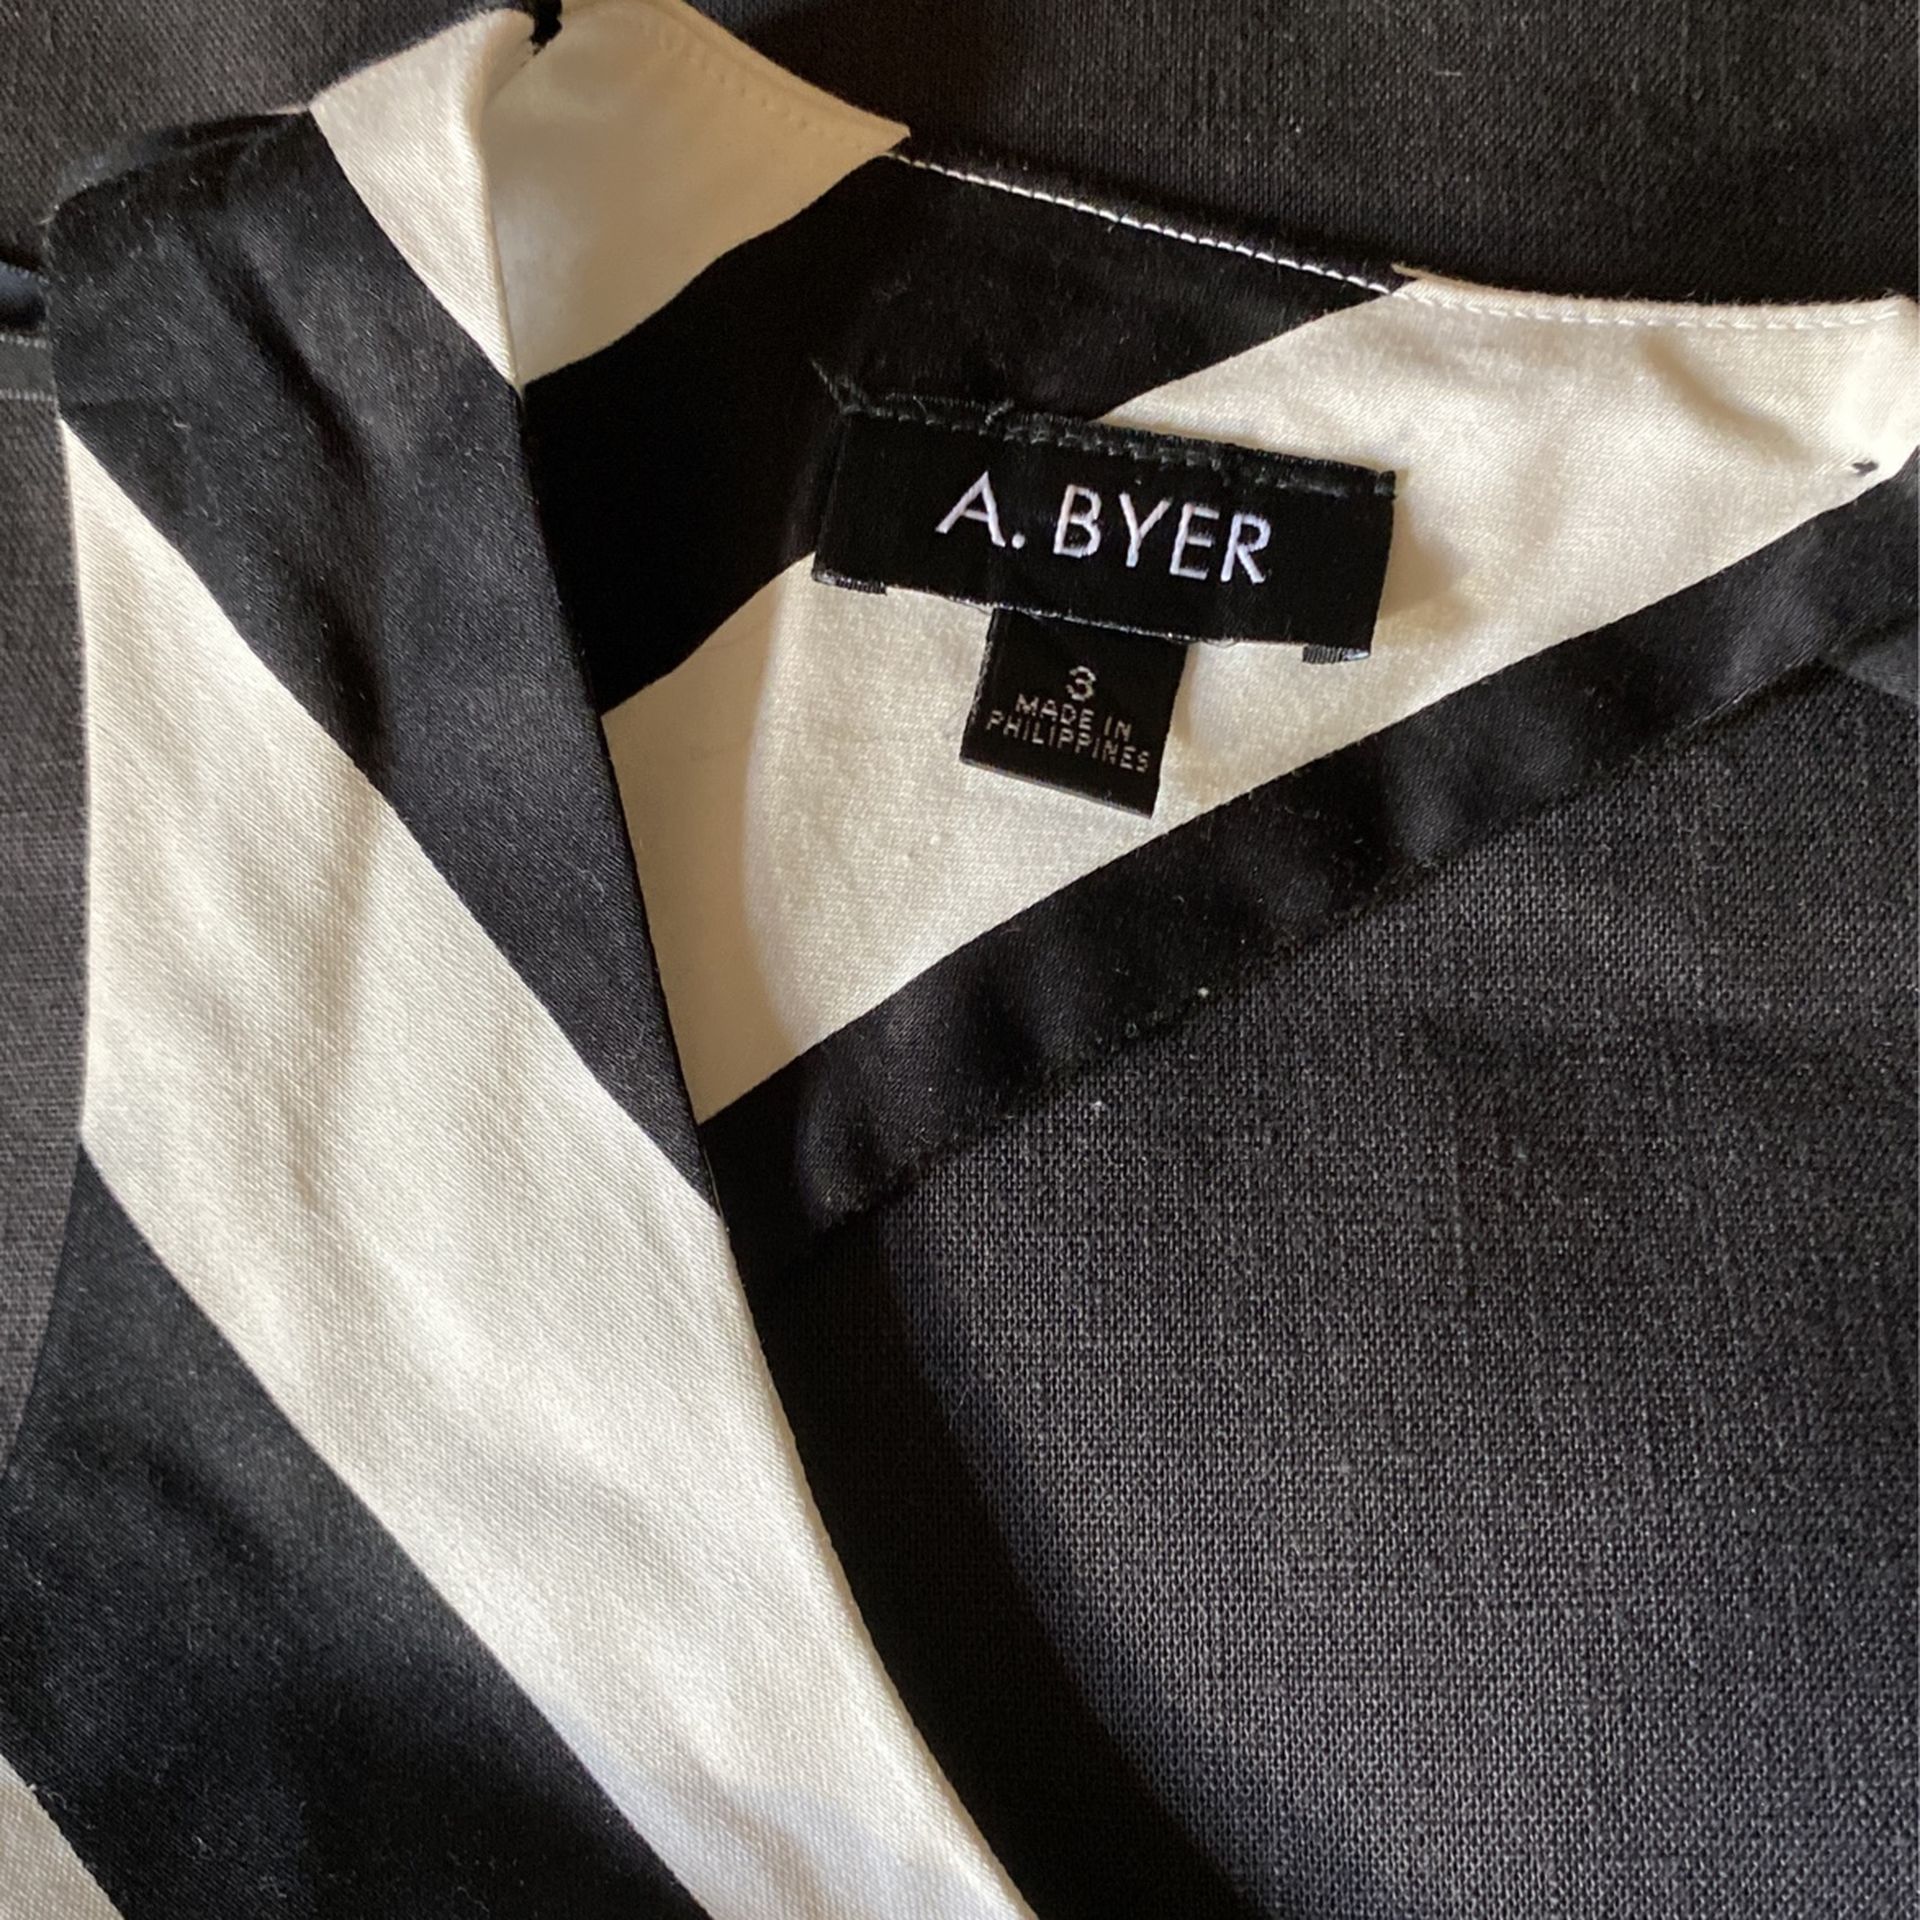 A.Byer Black And Whit Dress